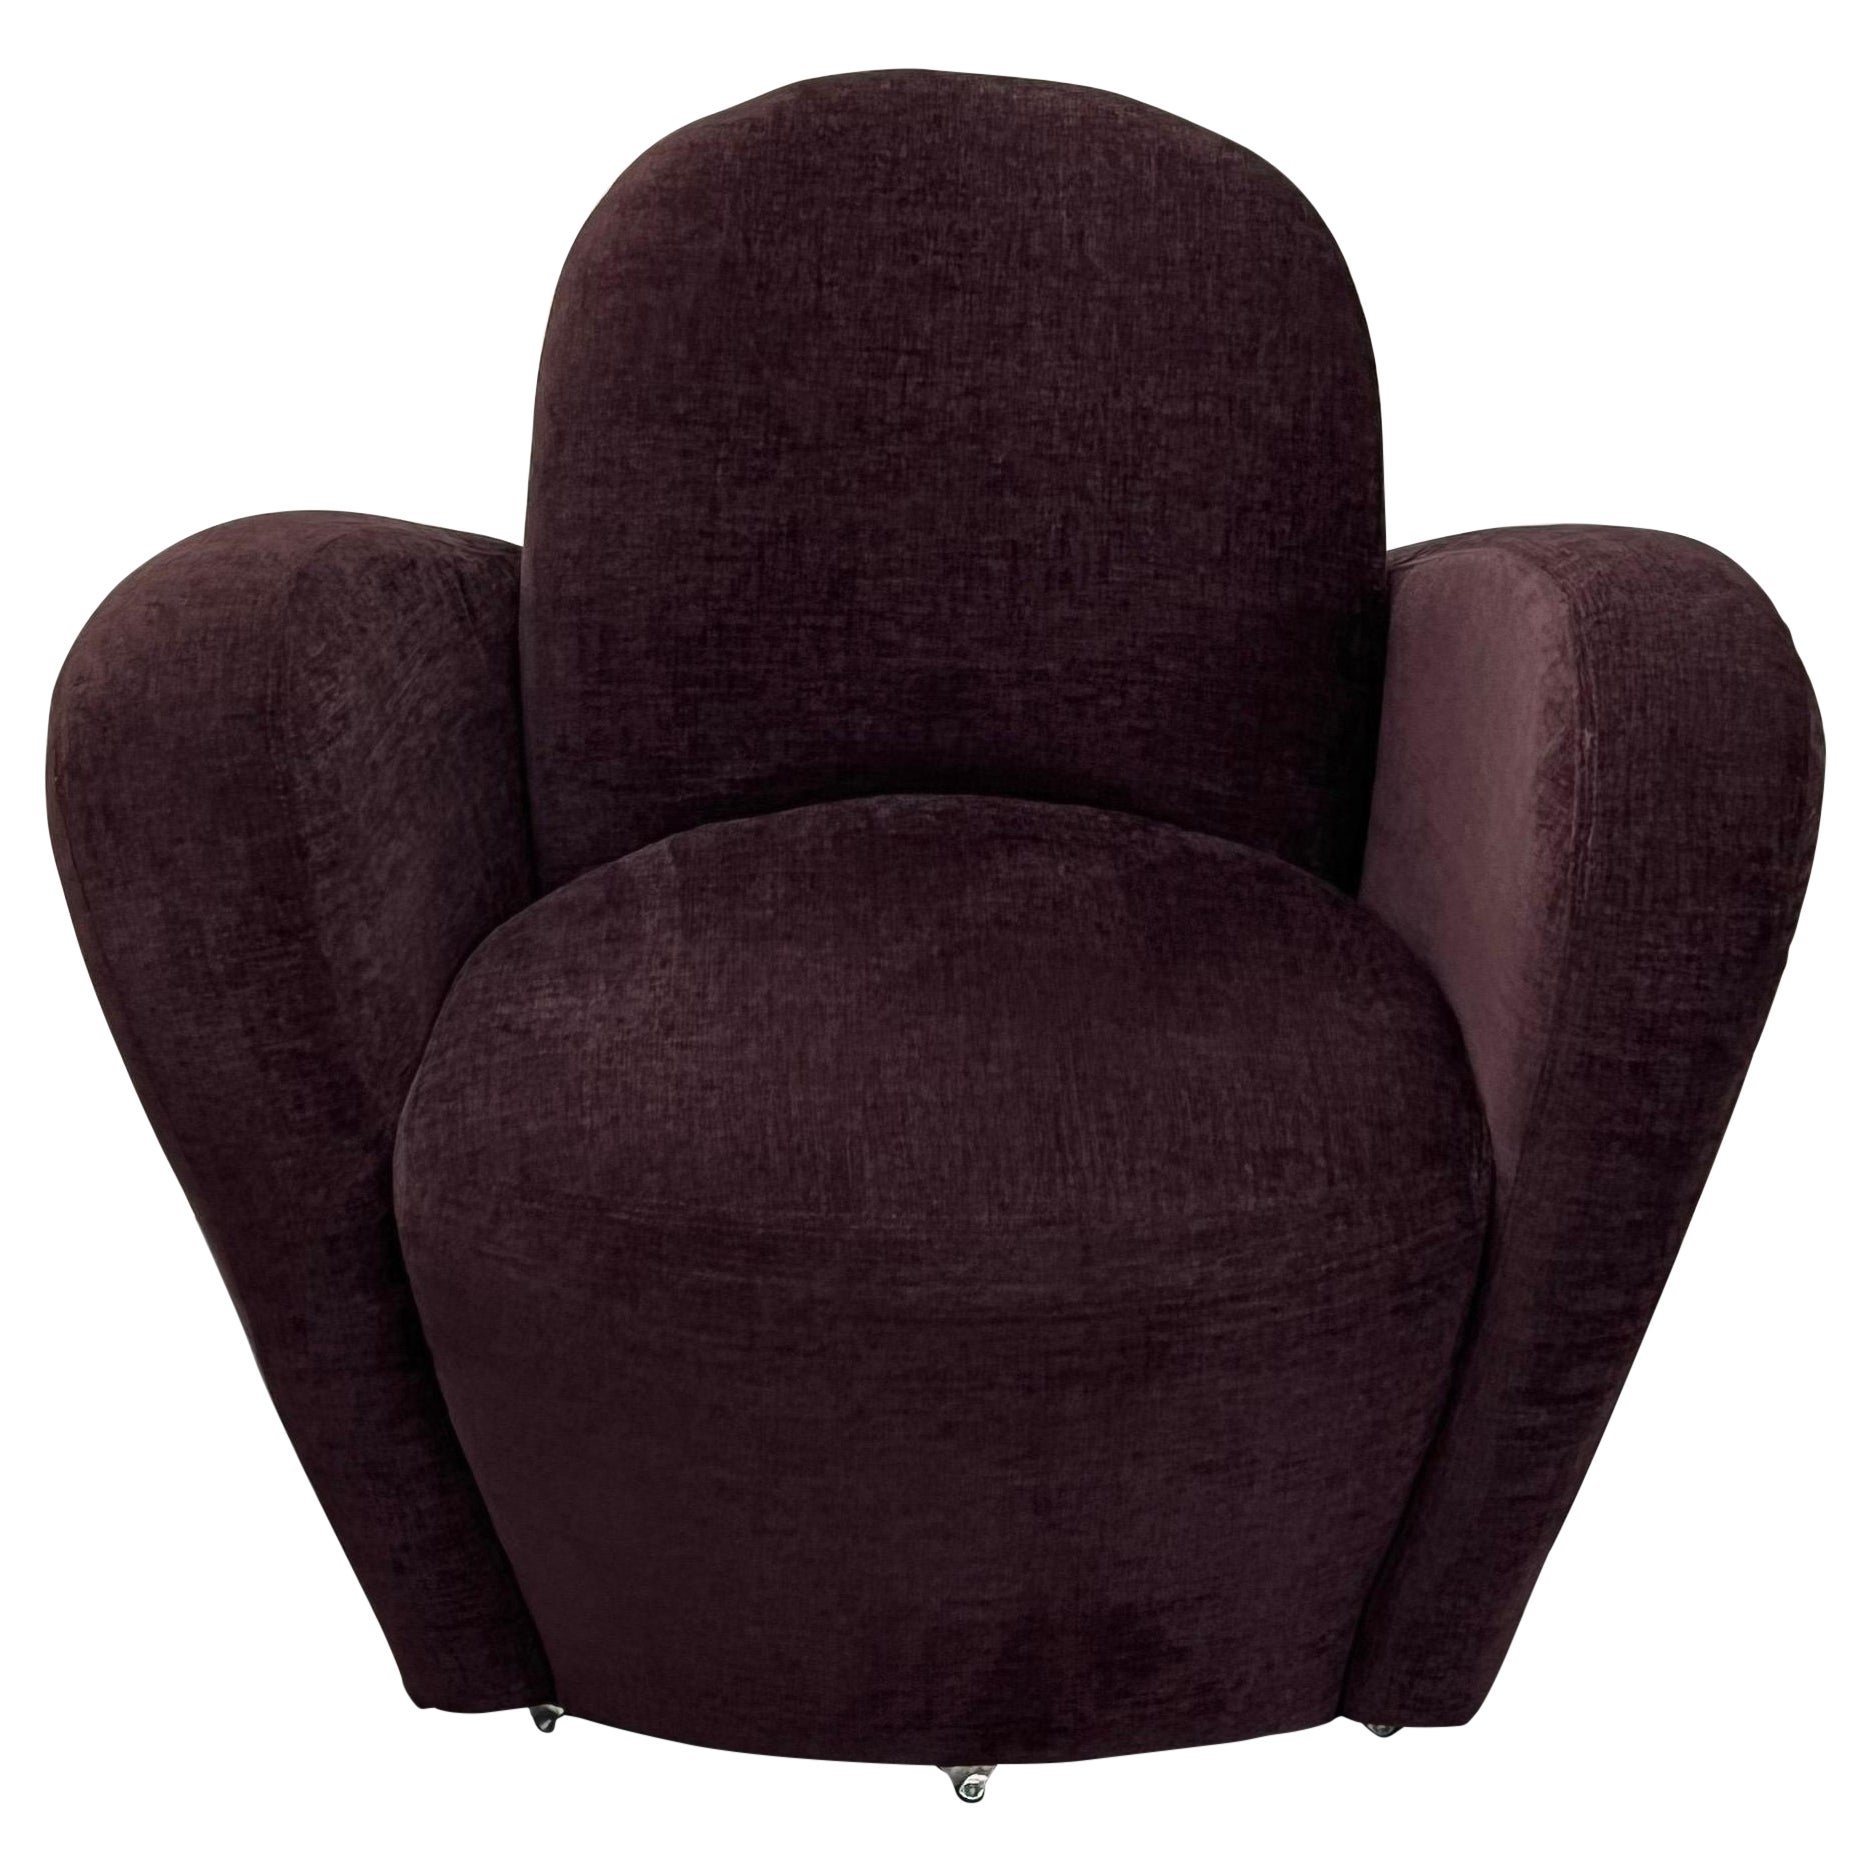 Michael Wolk "Miami" Swivel Loung Chair on Casters For Sale